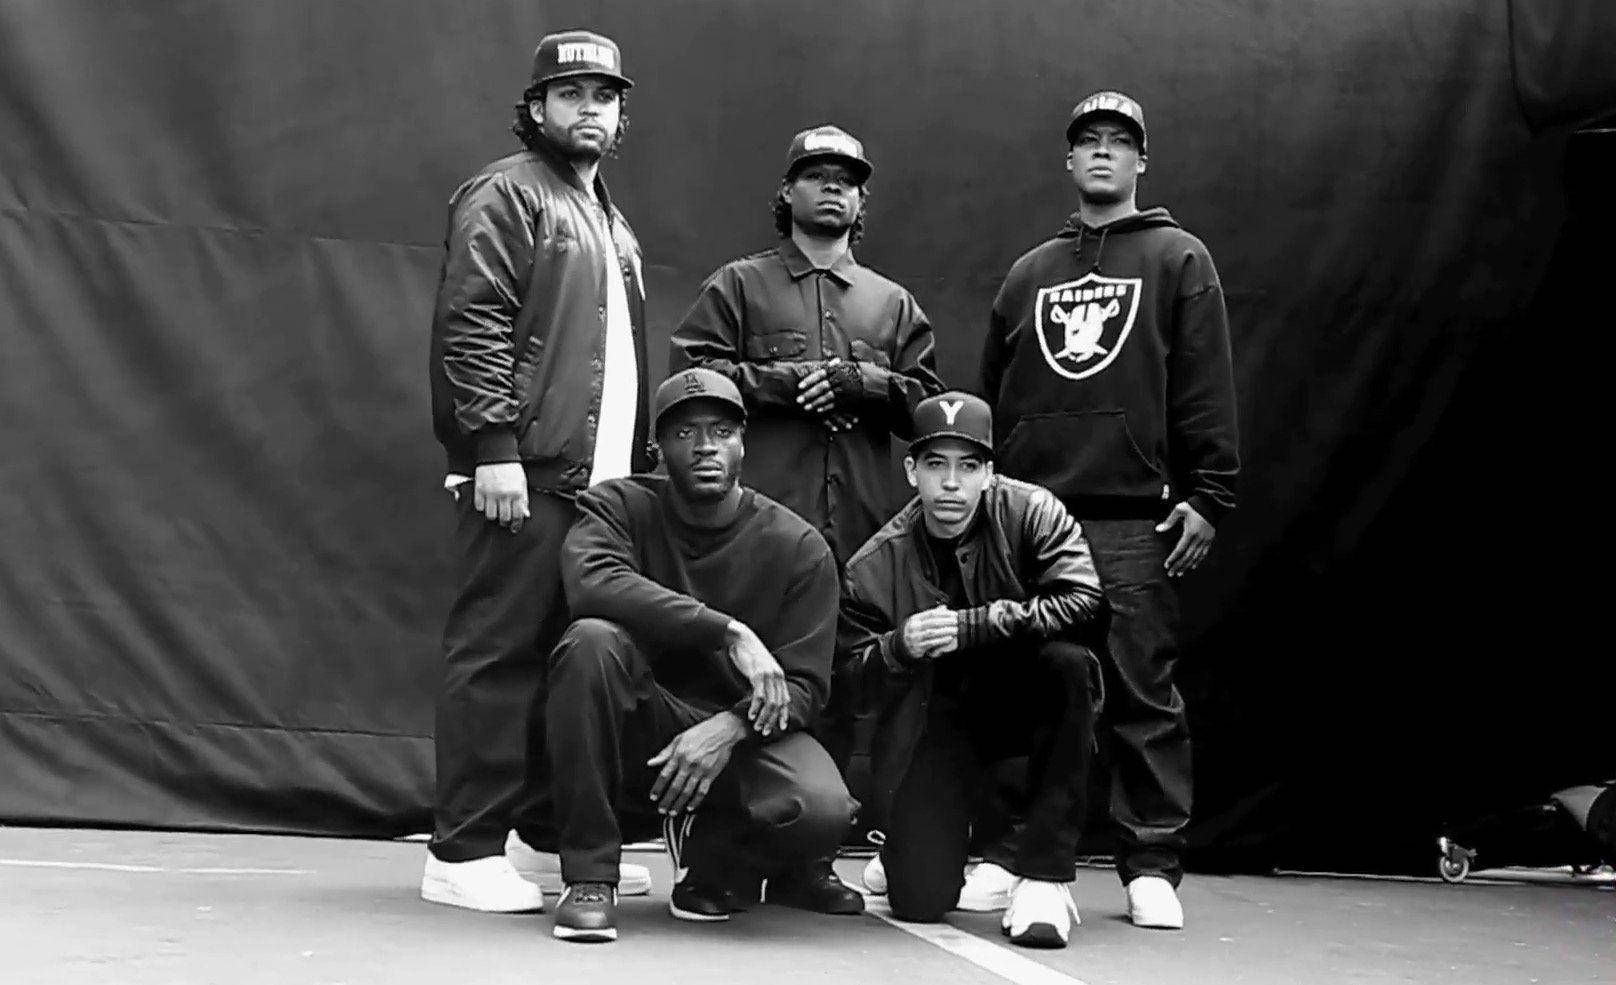 Nwa Wallpaper  Download to your mobile from PHONEKY